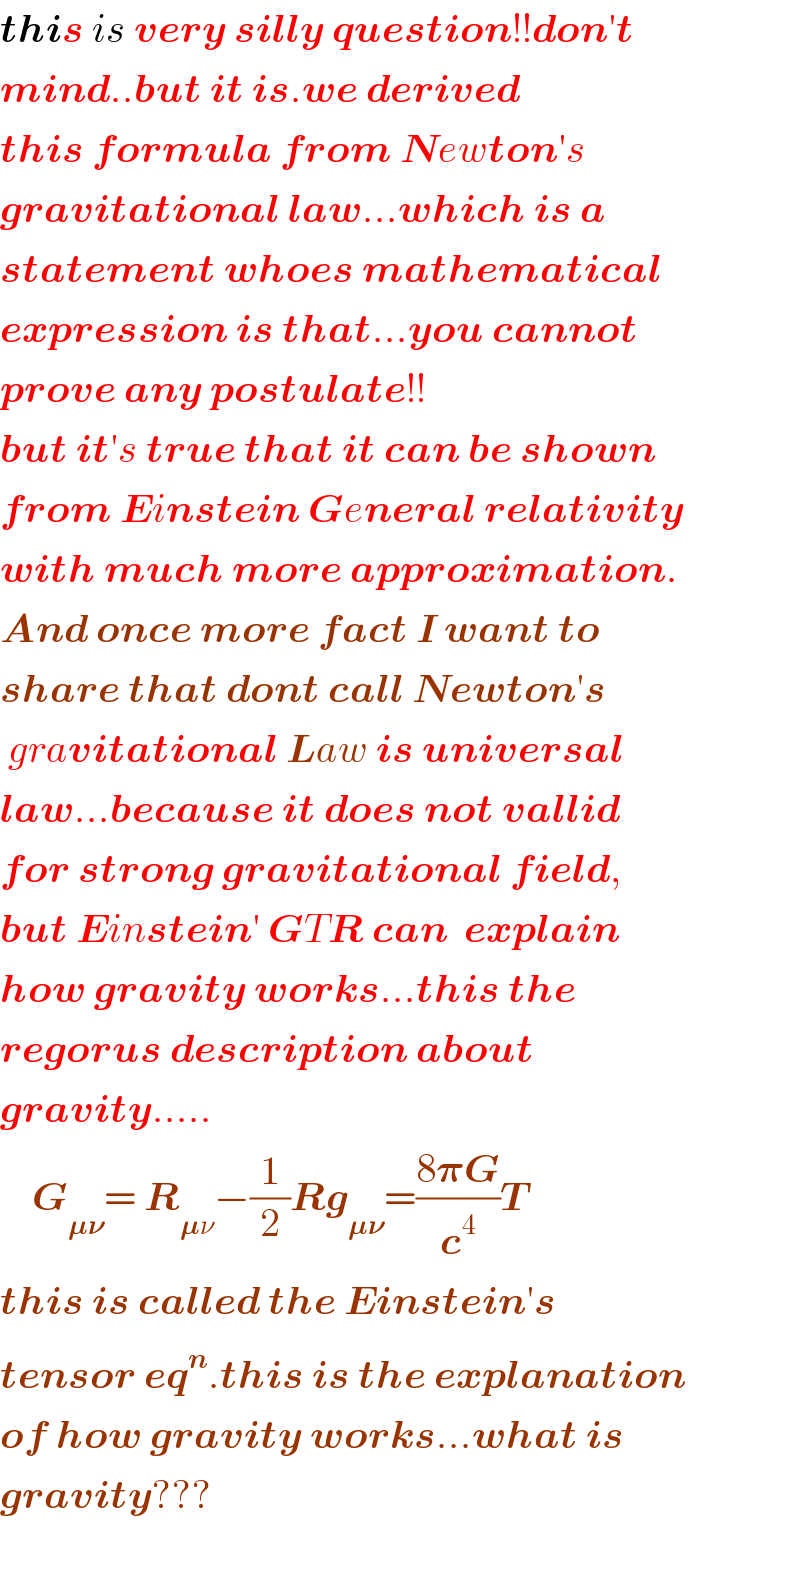 this is very silly question!!don′t  mind..but it is.we derived  this formula from Newton′s  gravitational law...which is a  statement whoes mathematical  expression is that...you cannot  prove any postulate!!  but it′s true that it can be shown  from Einstein General relativity  with much more approximation.  And once more fact I want to  share that dont call Newton′s   gravitational Law is universal  law...because it does not vallid  for strong gravitational field,  but Einstein′ GTR can  explain   how gravity works...this the  regorus description about  gravity.....      G_(𝛍𝛎) = R_(𝛍ν) −(1/2)Rg_(𝛍𝛎) =((8𝛑G)/c^4 )T  this is called the Einstein′s   tensor eq^n .this is the explanation  of how gravity works...what is  gravity???    